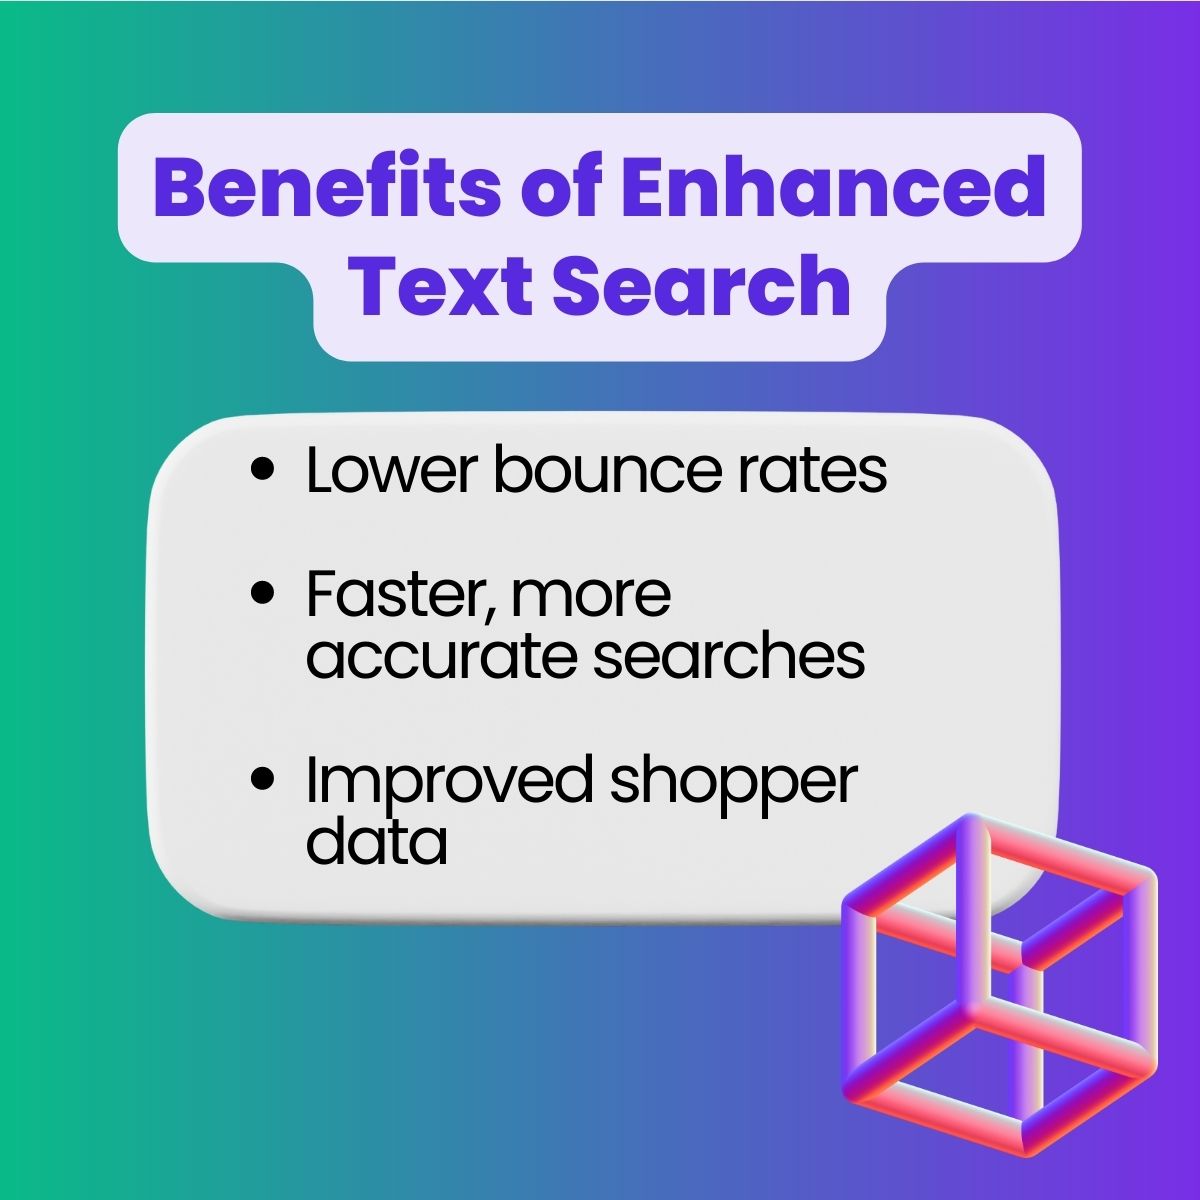 A purple and green image describing the benefits of enhanced text search